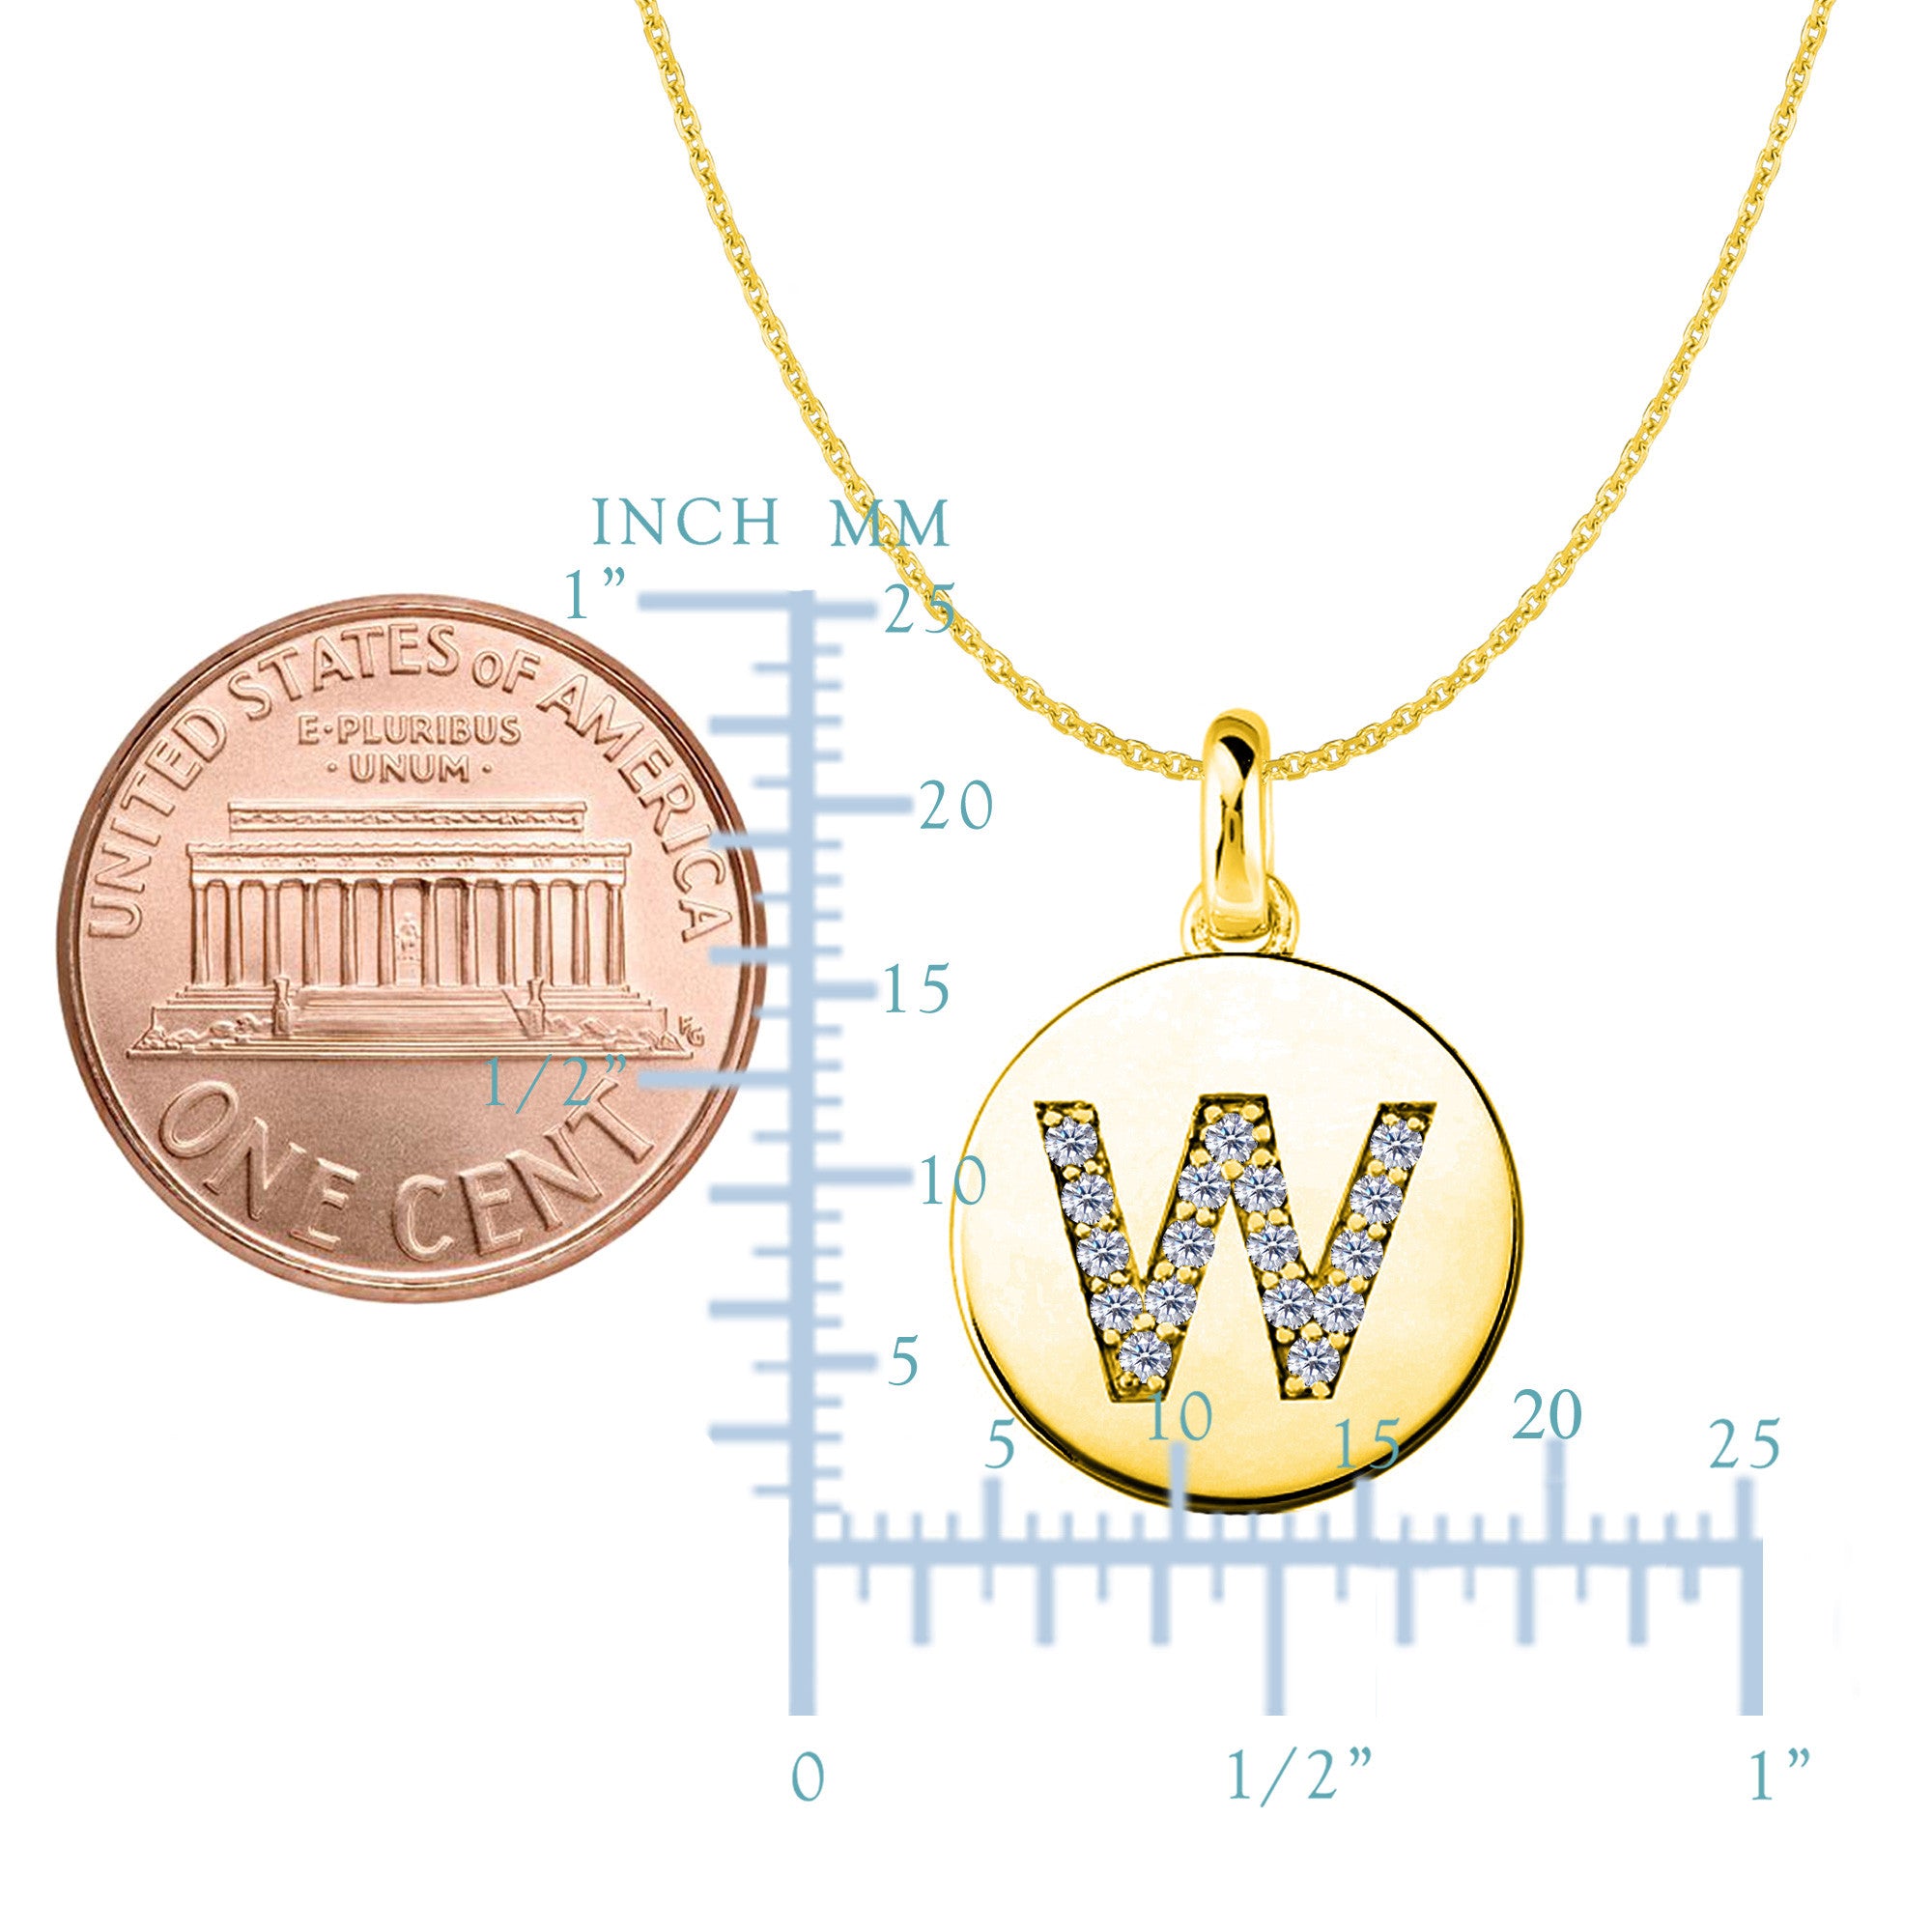 "W" Diamond Initial 14K Yellow Gold Disk Pendant (0.17ct) fine designer jewelry for men and women